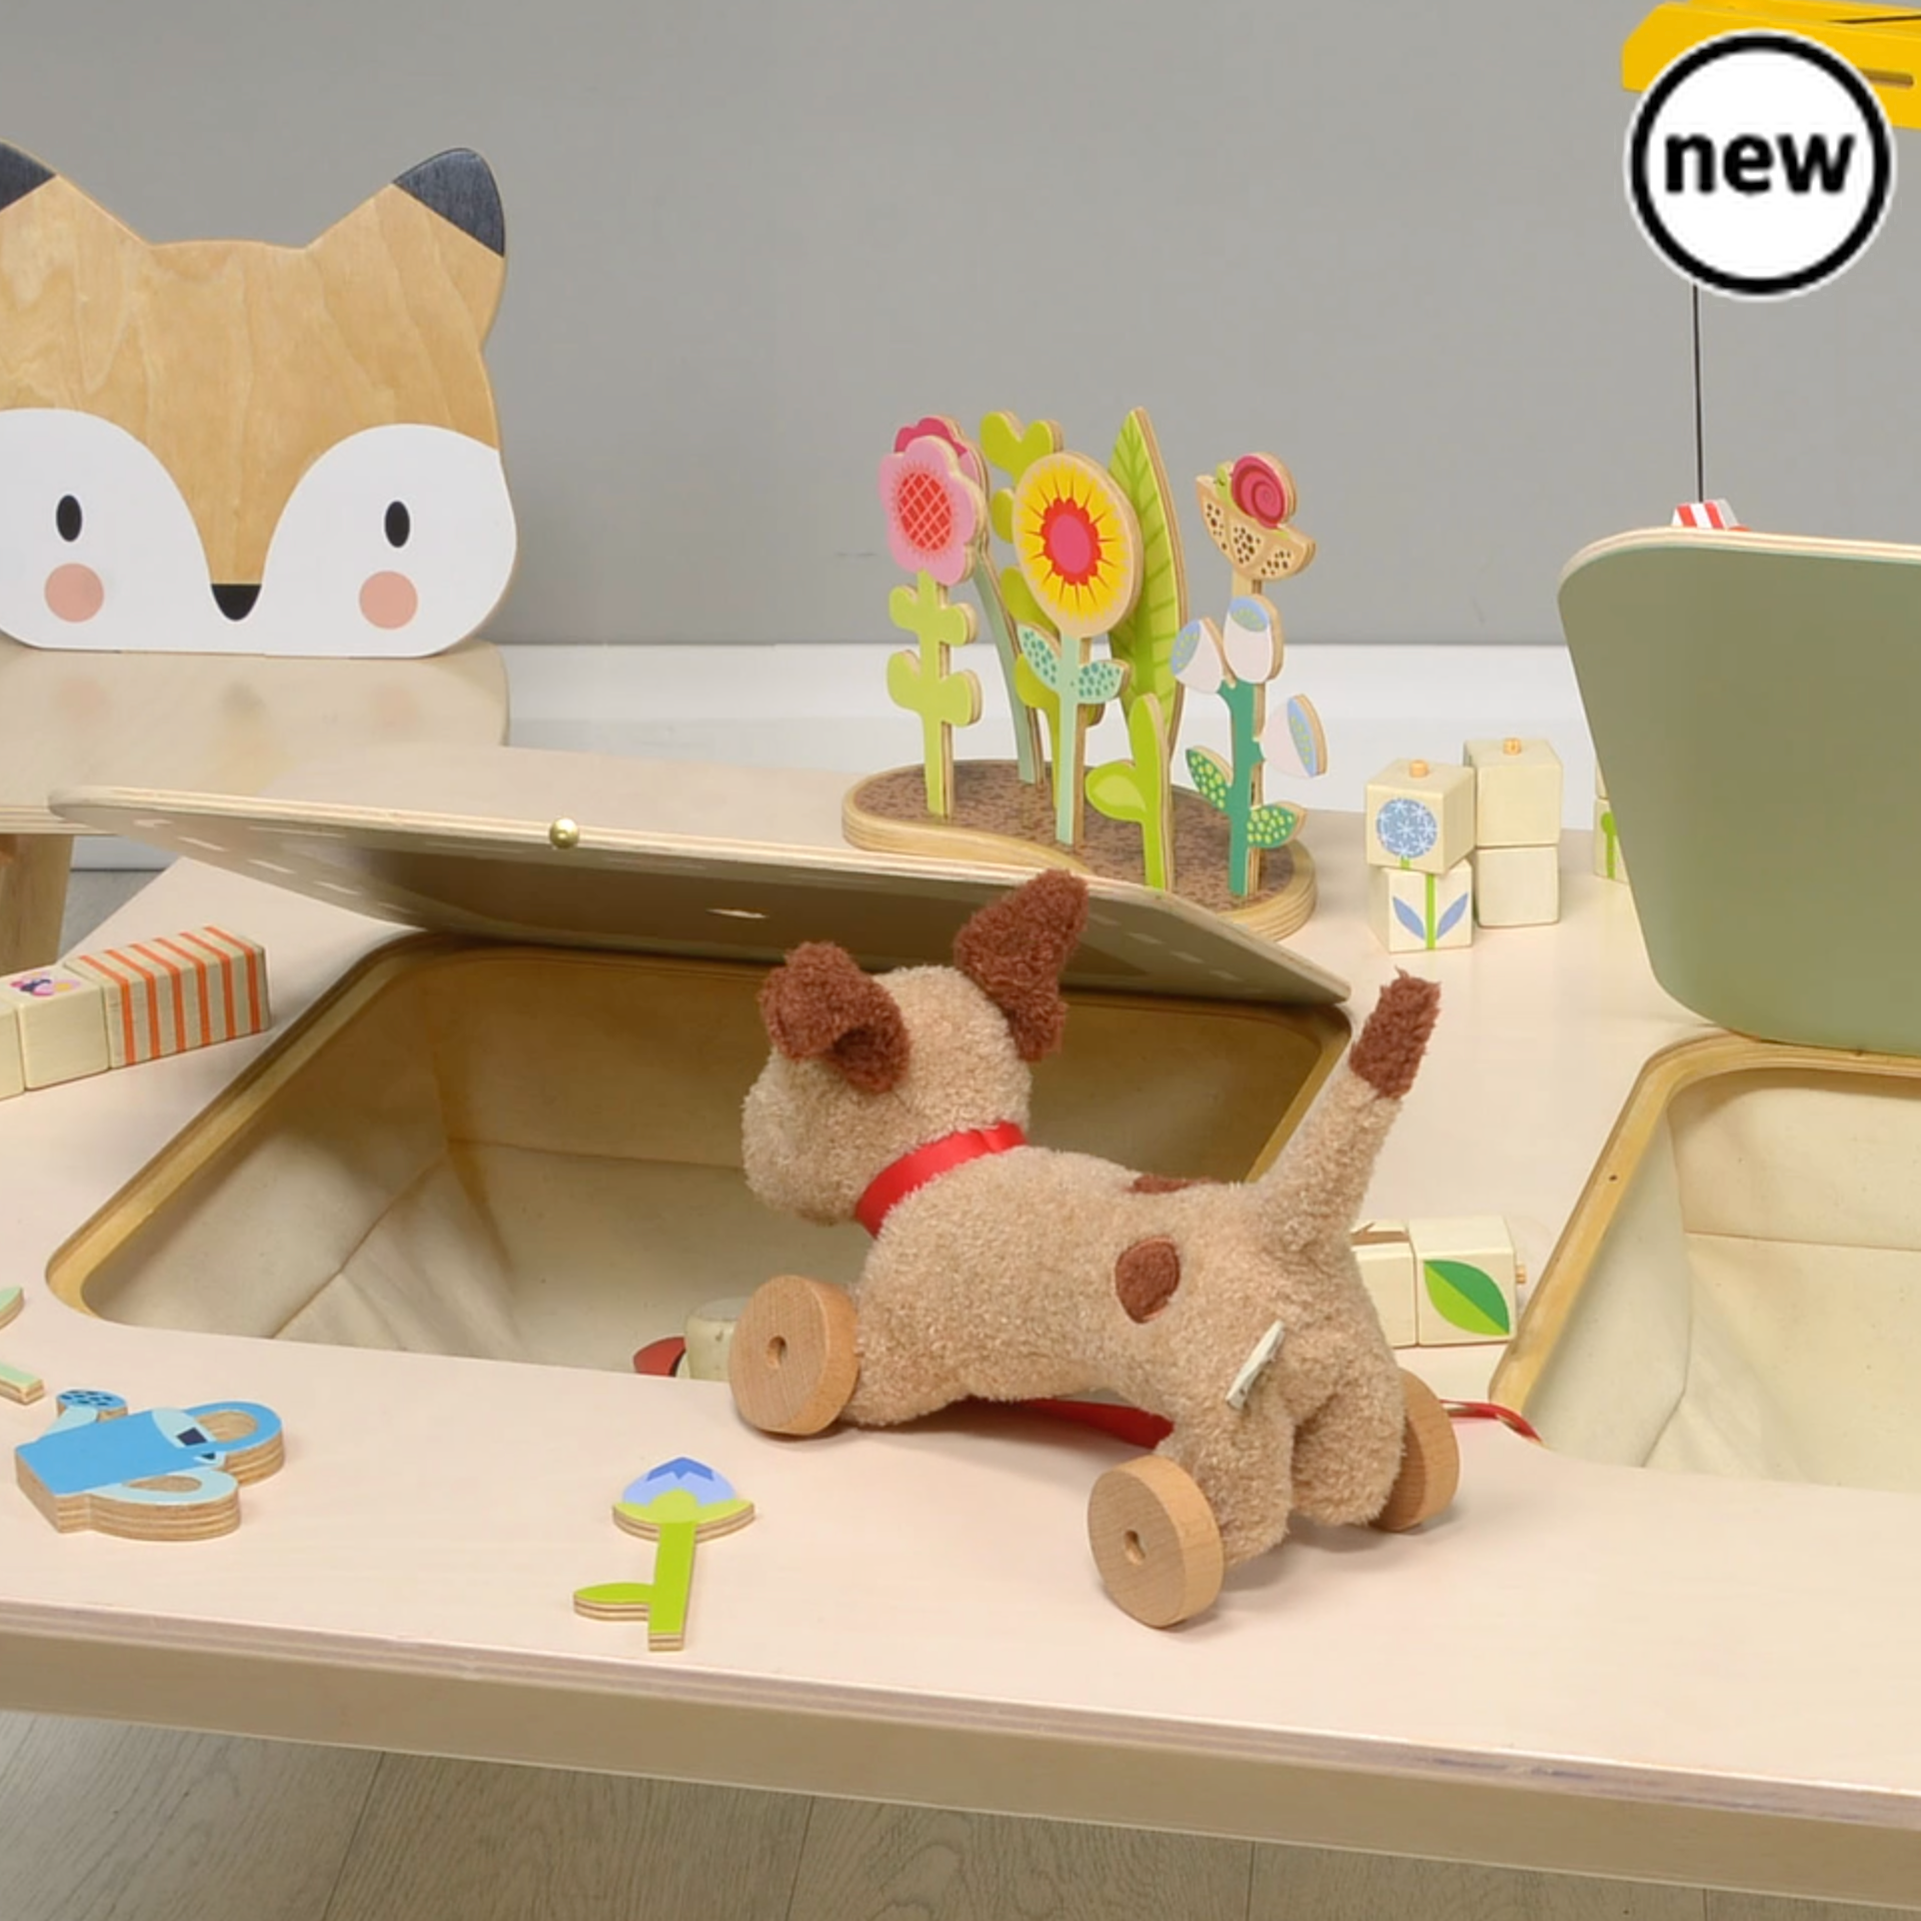 Tenderleaf Toys Wooden Large Play Table, Tender Leaf at their best, what an ingenious table for your little ones. The table is white and made from plywood with 2 clever storage areas, made from strong canvas fabric. Turn the lids over to have a road printed on one side and on the other a soft green with a sweet little bird illustration. Age range: 3 Years And Older Product size: 39.37 x 27.56 x 13.78” Weight: 19.36 lbs, Tenderleaf Toys Wooden Large Play Table,Wooden Toys,Tenderleaf, 